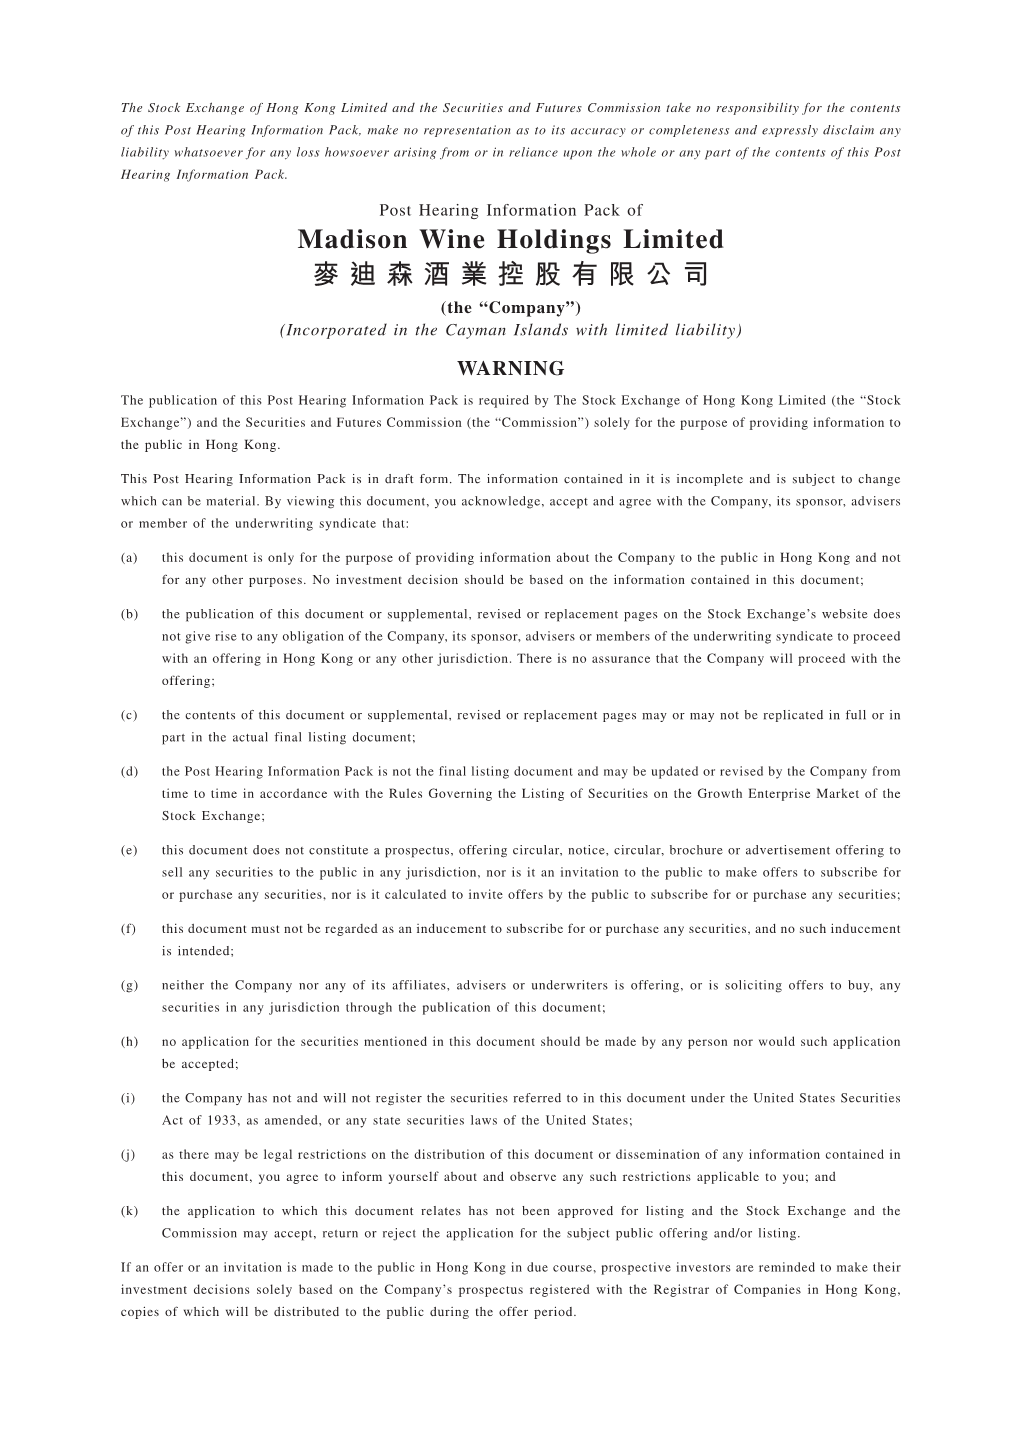 Madison Wine Holdings Limited 麥迪森酒業控股有限公司 (The “Company”) (Incorporated in the Cayman Islands with Limited Liability) WARNING